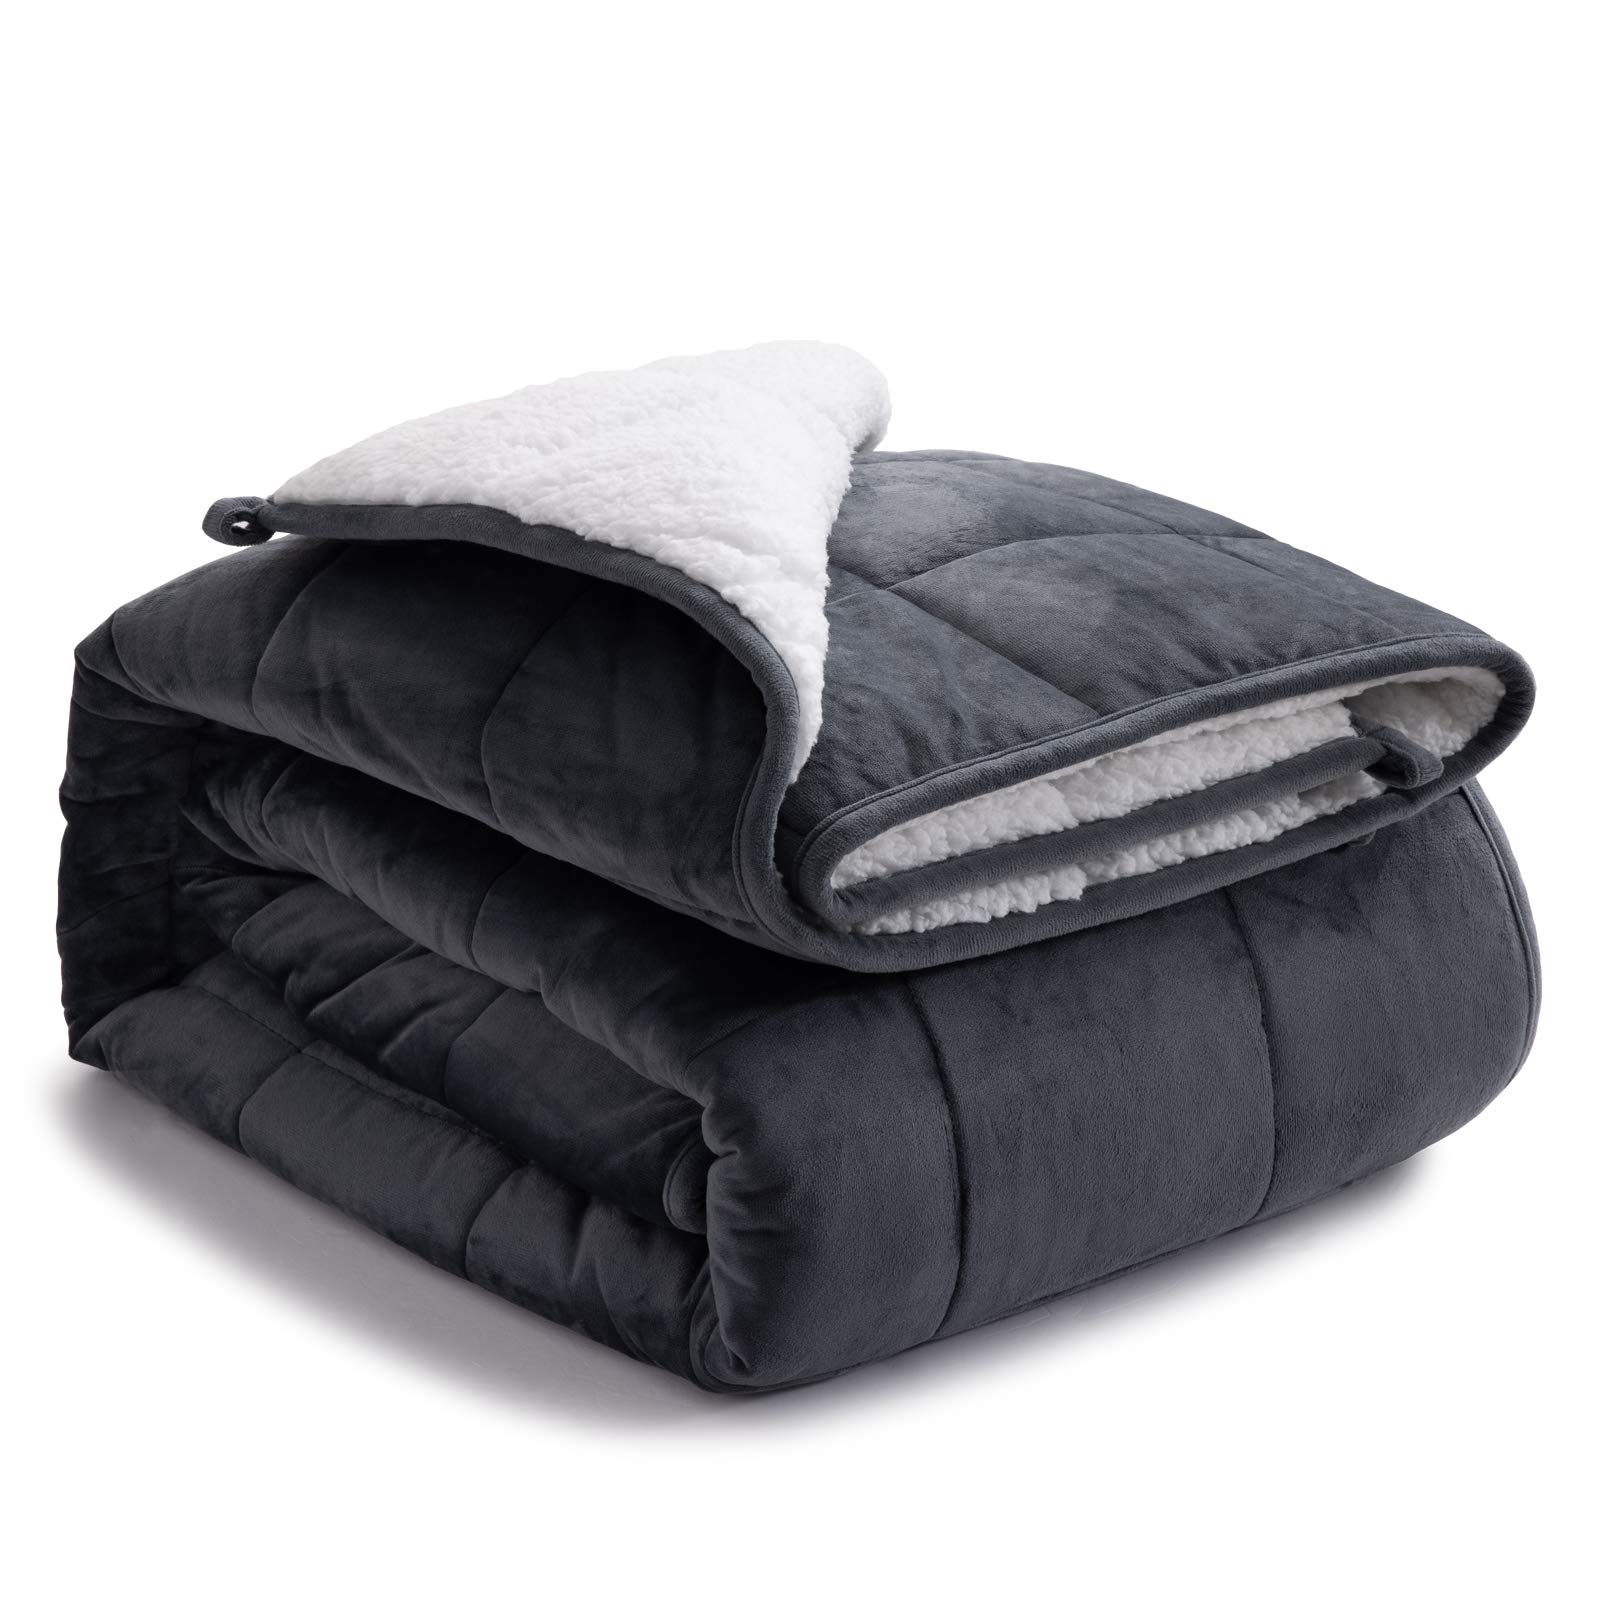 Bedsure Sherpa Fleece Weighted Blanket Queen Size 15 pounds for Adults - Soft Heavy Blanket with Premium Glass Beads